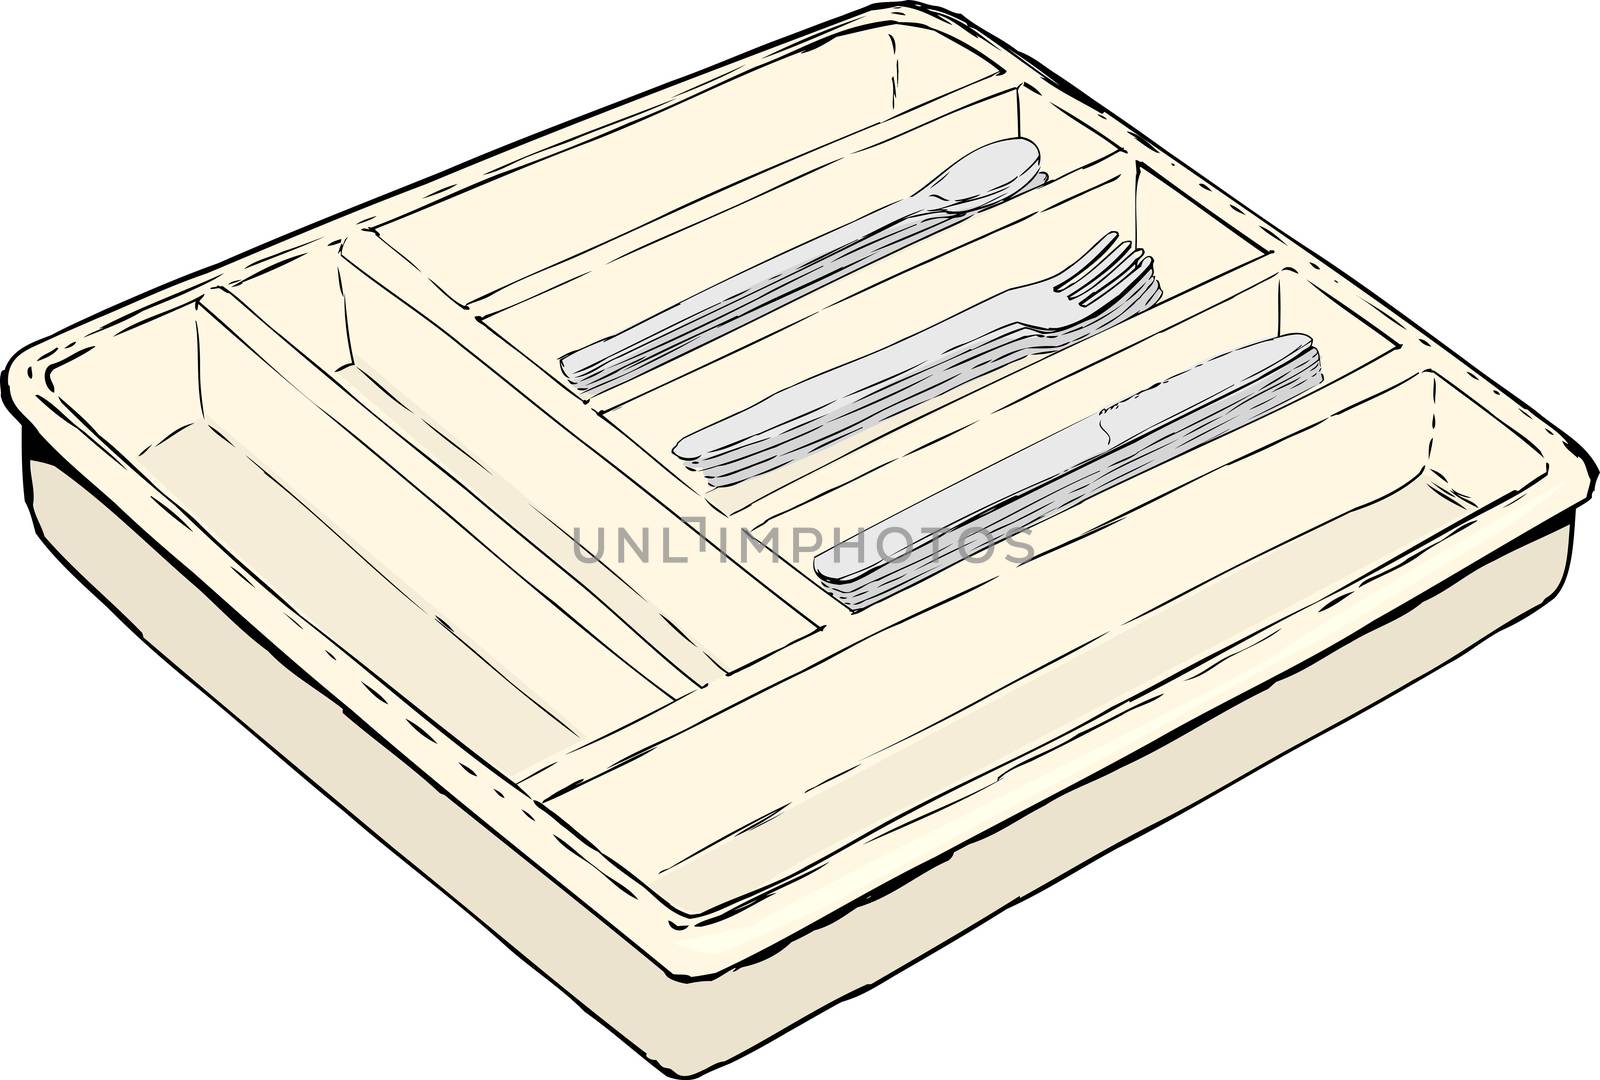 Tray with spoons, forks and knives by TheBlackRhino